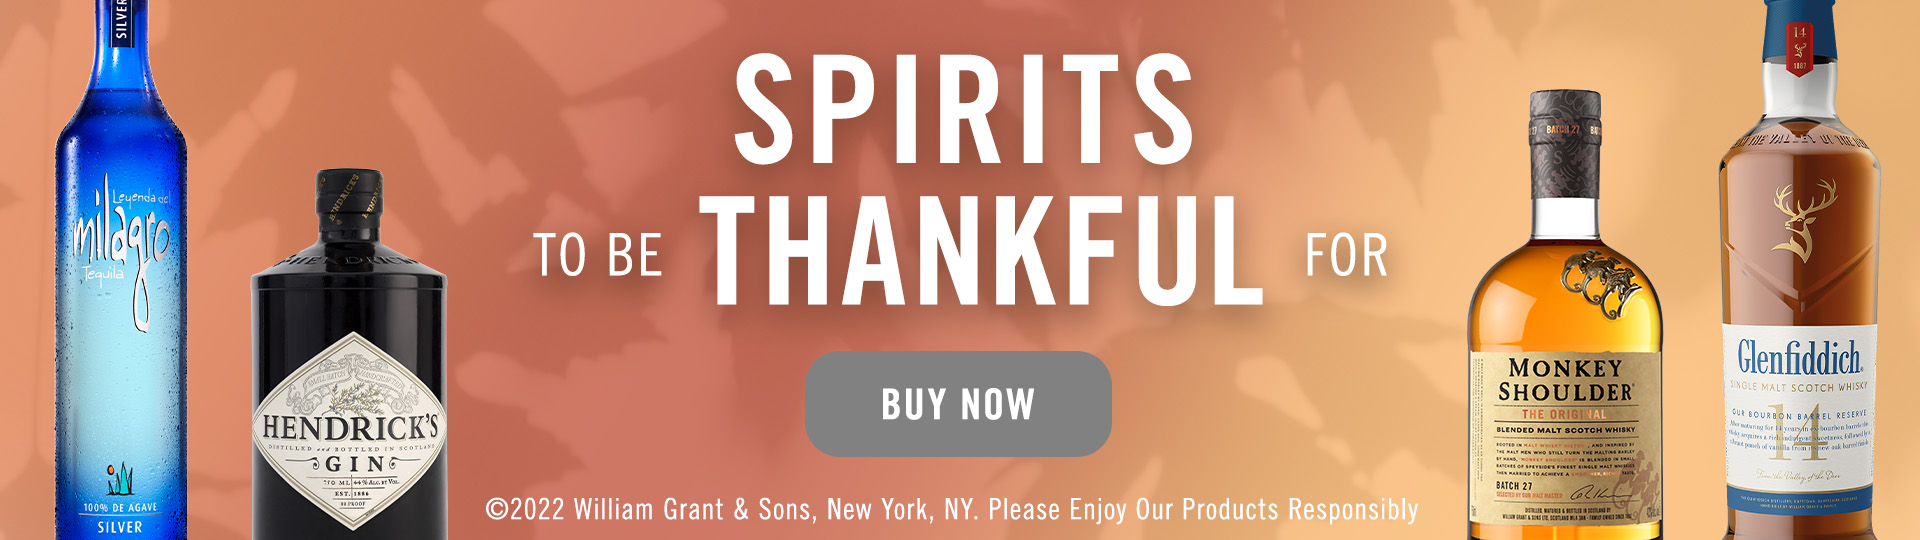 FY23 Spirits To Be Thankful For